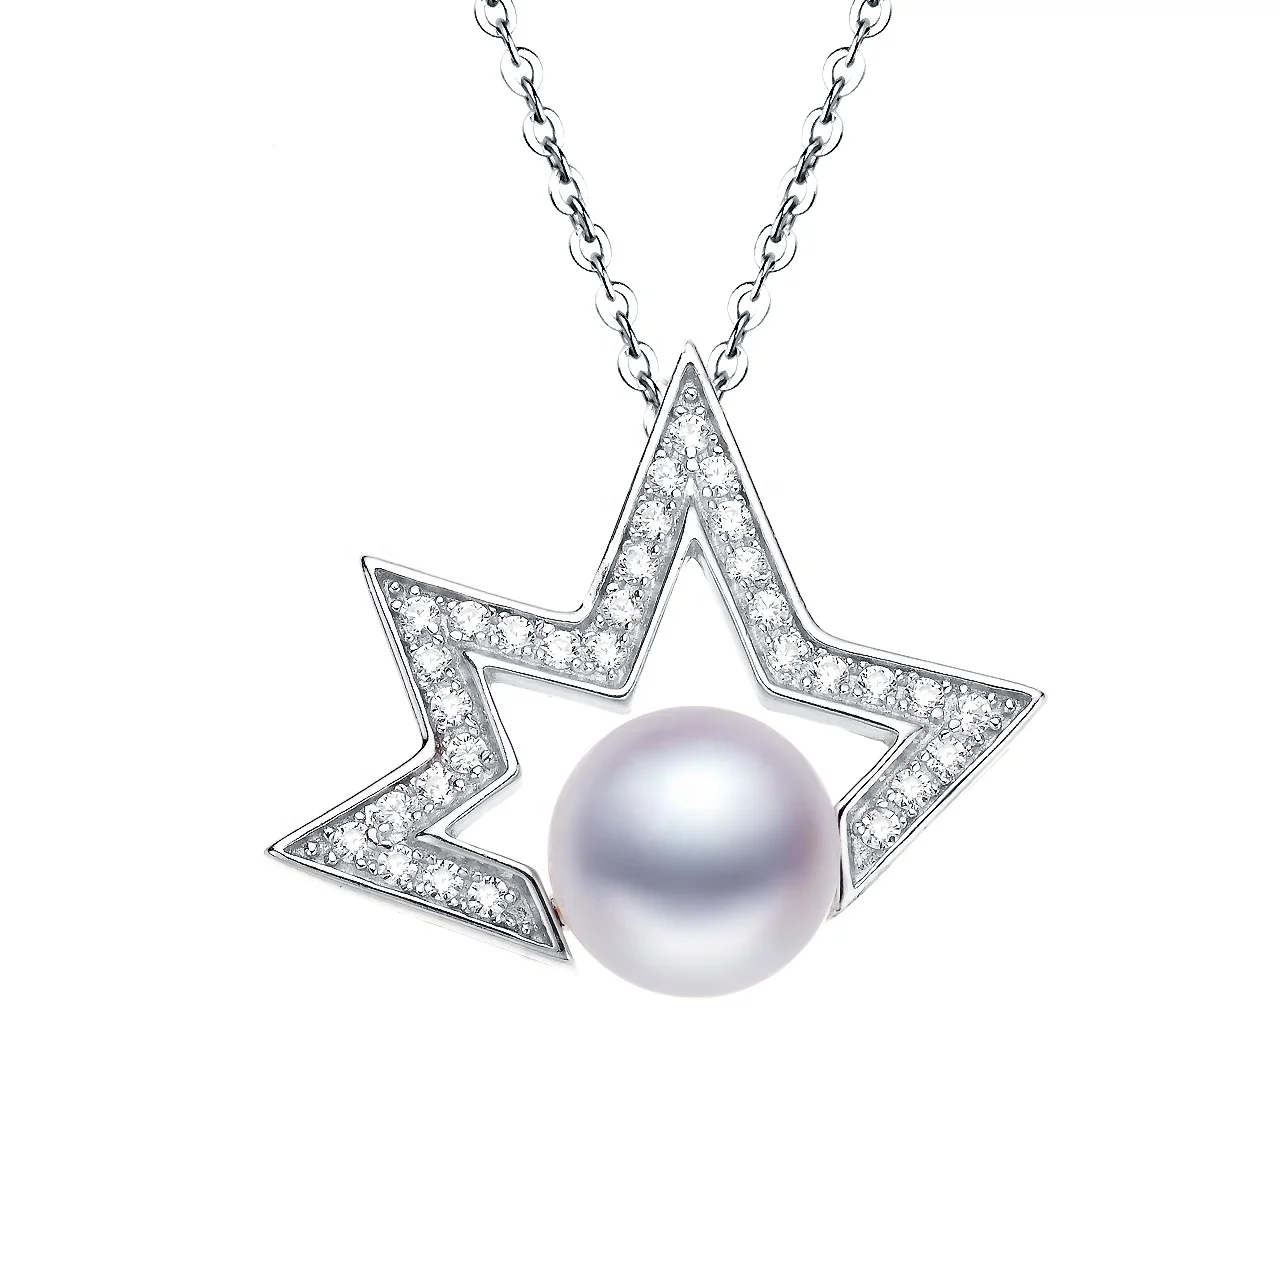 

Hot Selling Good Quality S925 Silver Women 100% Moon and stars Shooting Star North Star Pendant Natural Pearl Necklace Jewelry, White